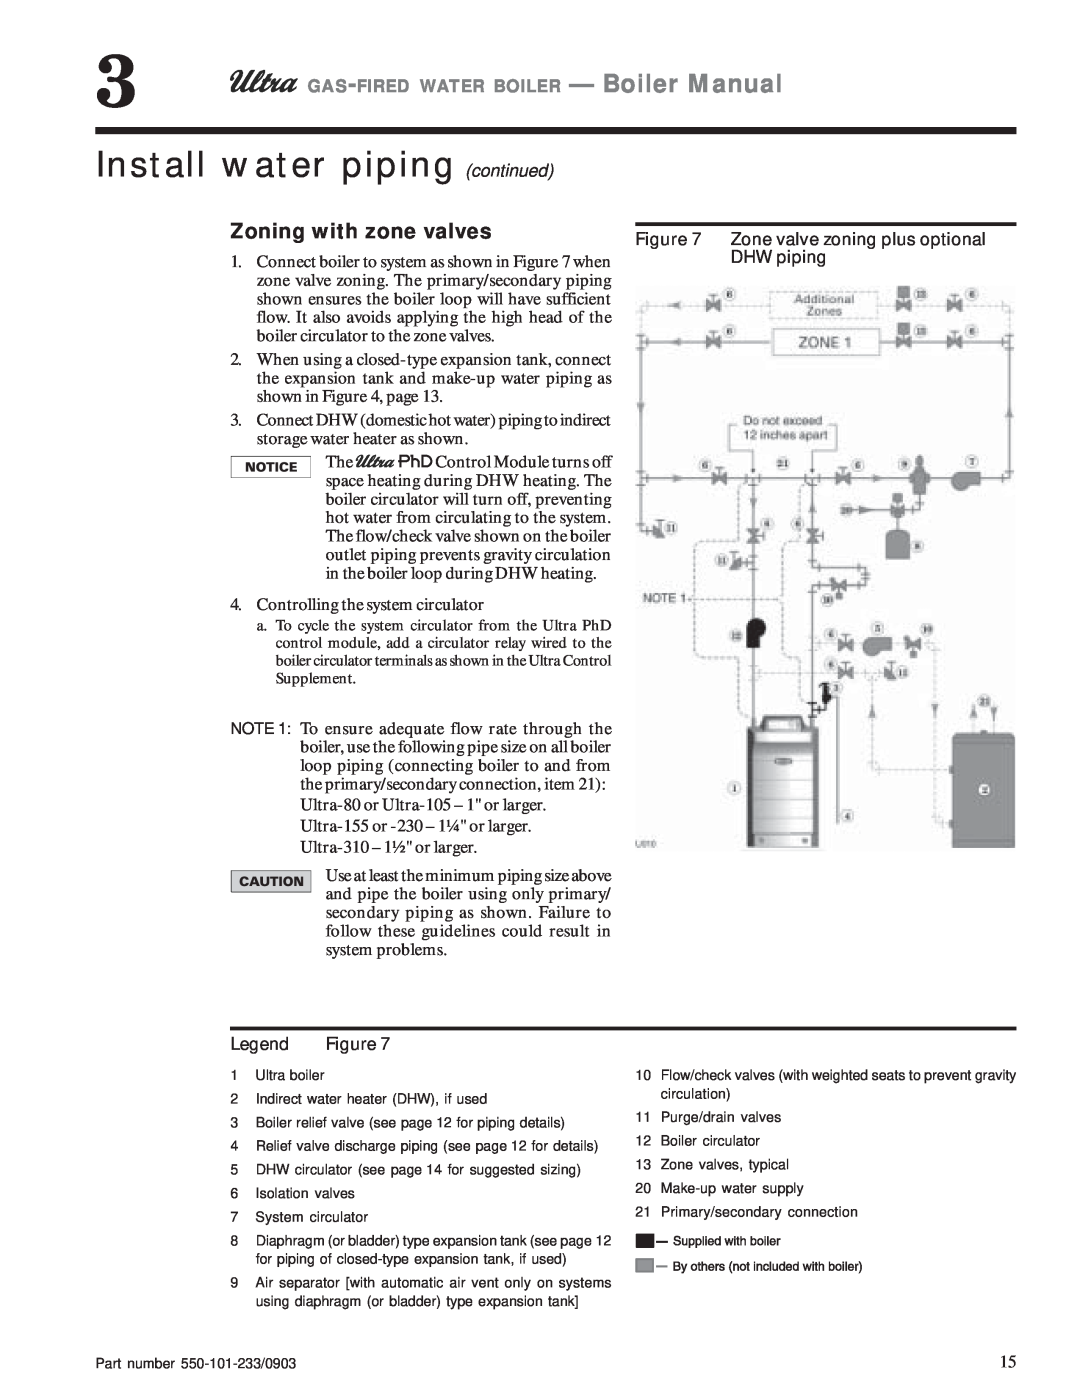 Weil-McLain 80 Install water piping continued, Zoning with zone valves, GAS-FIRED WATER BOILER - Boiler Manual, DHW piping 